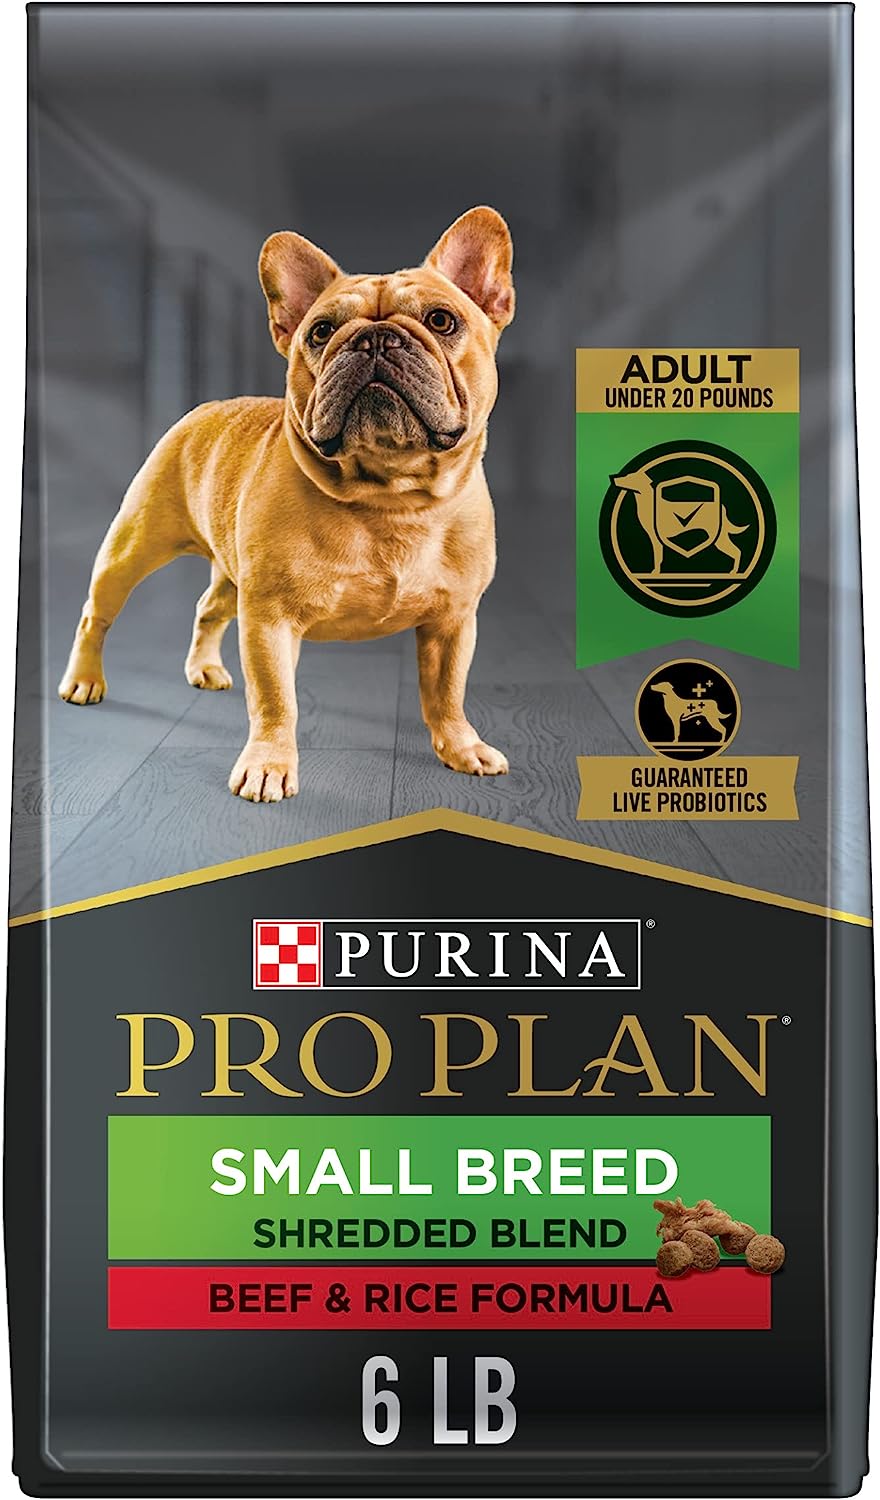 Purina pro plan High Protein Small Breed Dog Food, Shredded Blend Beef & Rice Formula - 6 lb. Bag